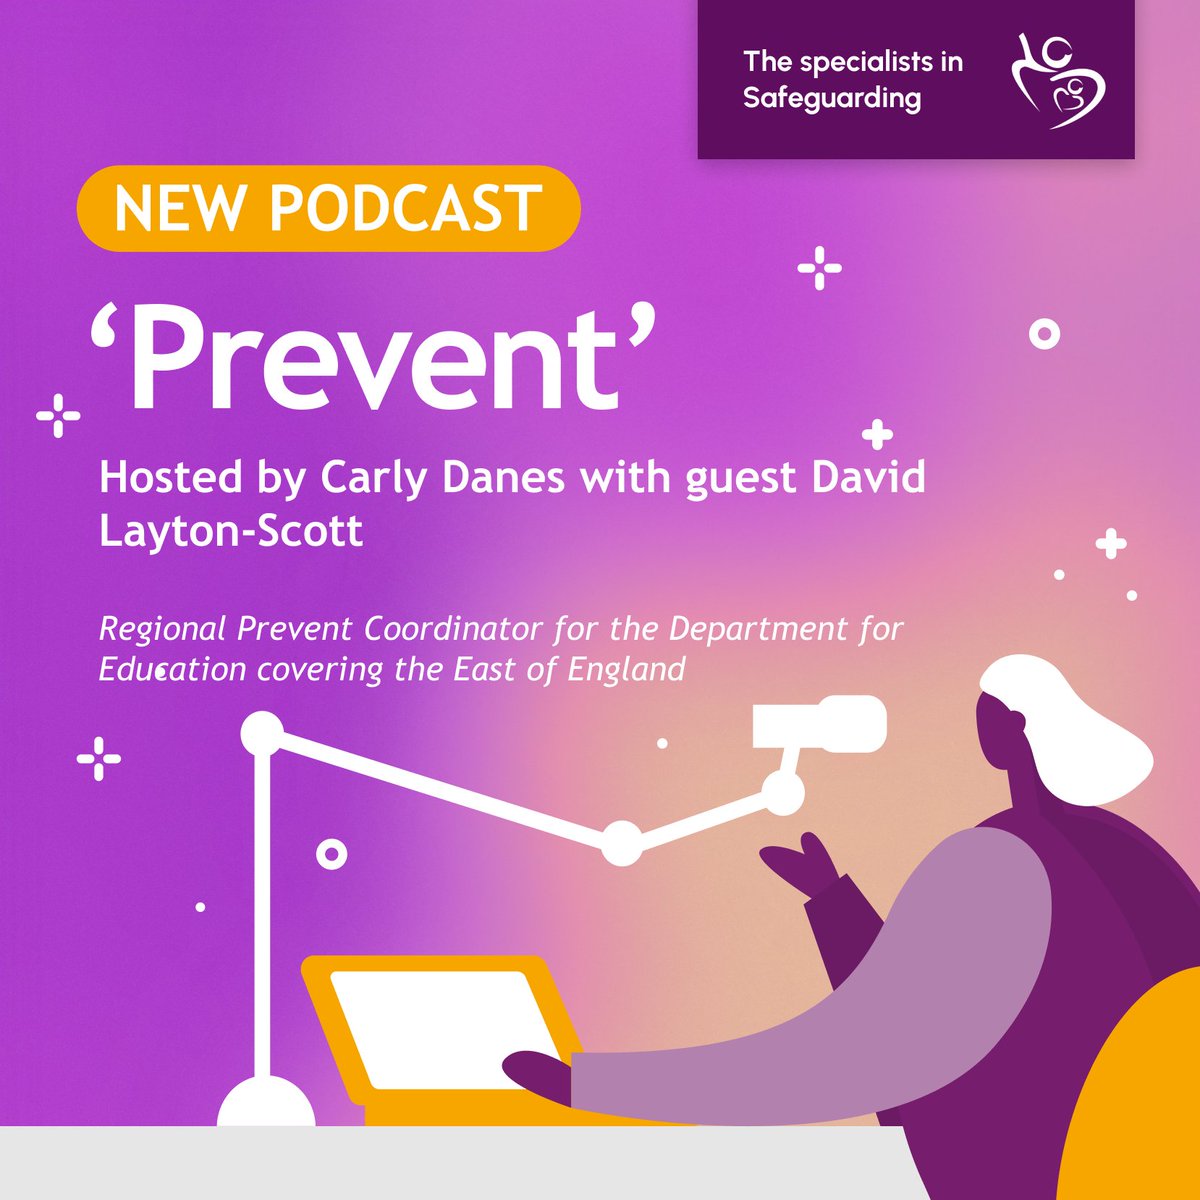 🎙️ NEW PODCAST EPISODE 🎙️

Join Carly & this week's guest David Layton-Scott the Regional Prevent Coordinator for the Department for Education covering the East of England

podcasts.apple.com/gb/podcast/pre…

#Safeguarding #ProtectingChildren #ChildSafety #PreventingAbuse #ChildProtection